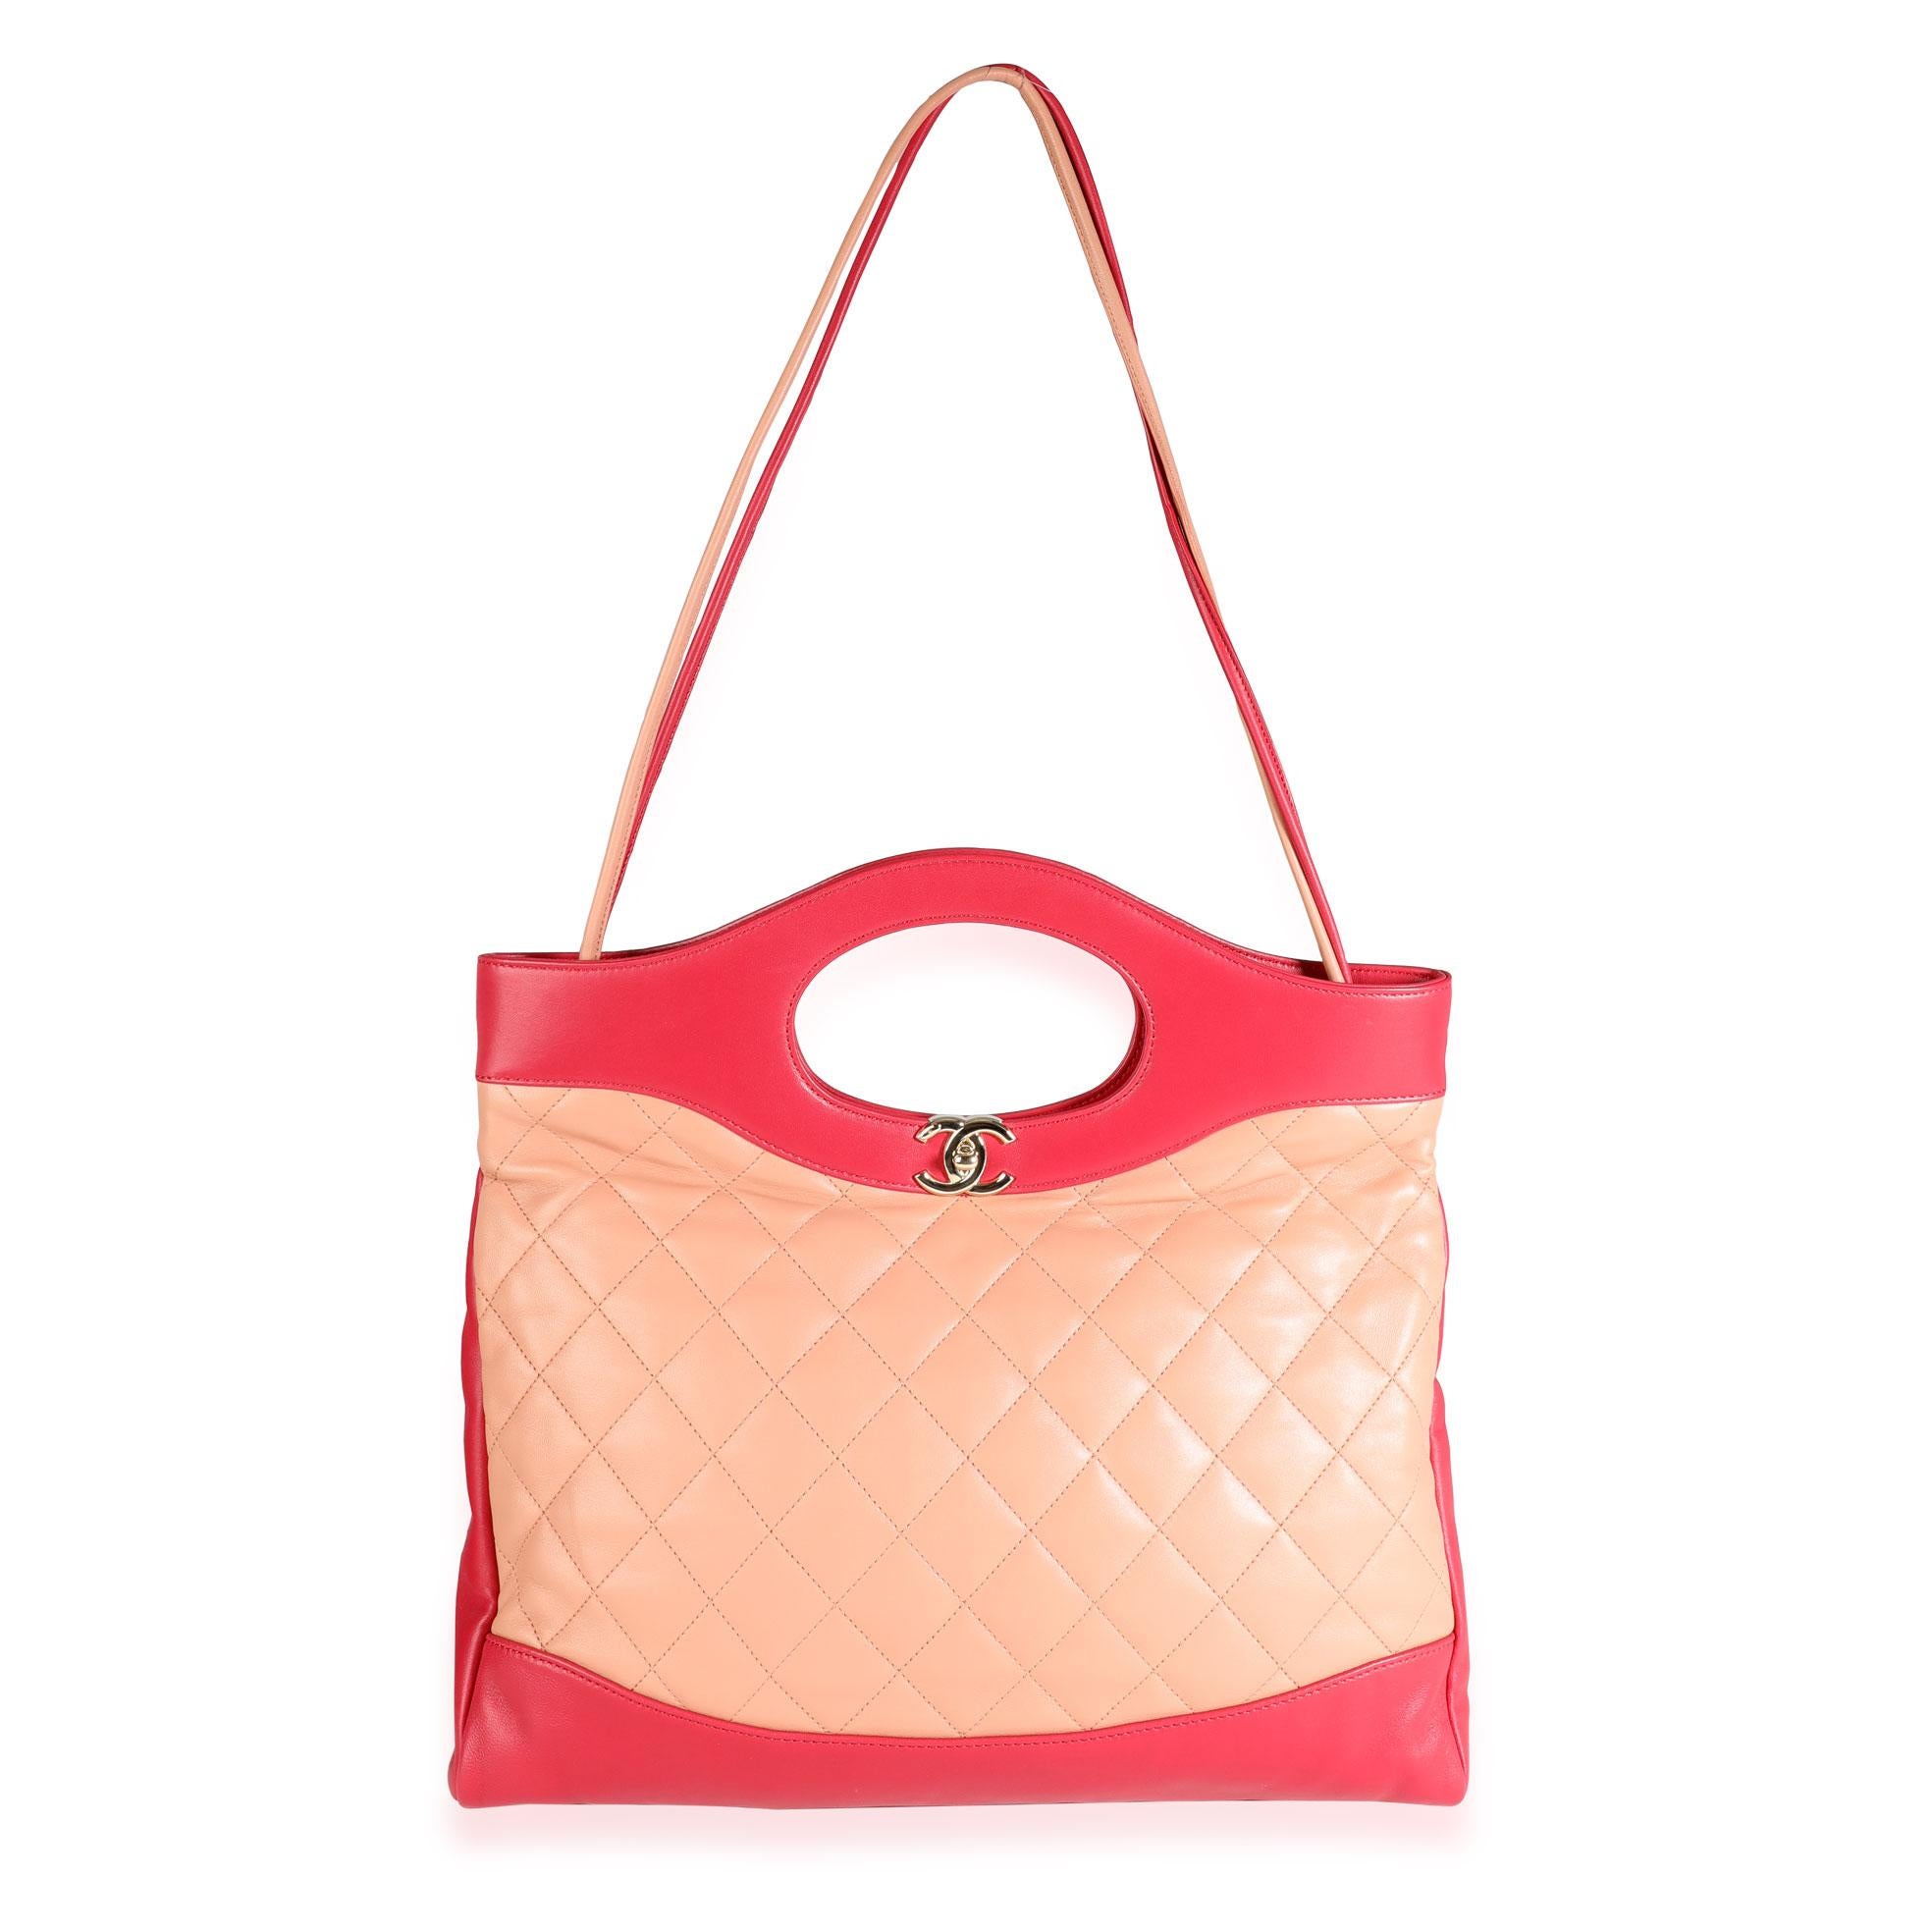 Listing Title: Chanel Peach & Light Red Quilted Calfskin Large 31 Shopping Bag
SKU: 115436
MSRP: 4400.00
Condition: Pre-owned (3000)
Handbag Condition: Excellent
Condition Comments: Excellent Condition. Faint scuffing to leather at handles. No other